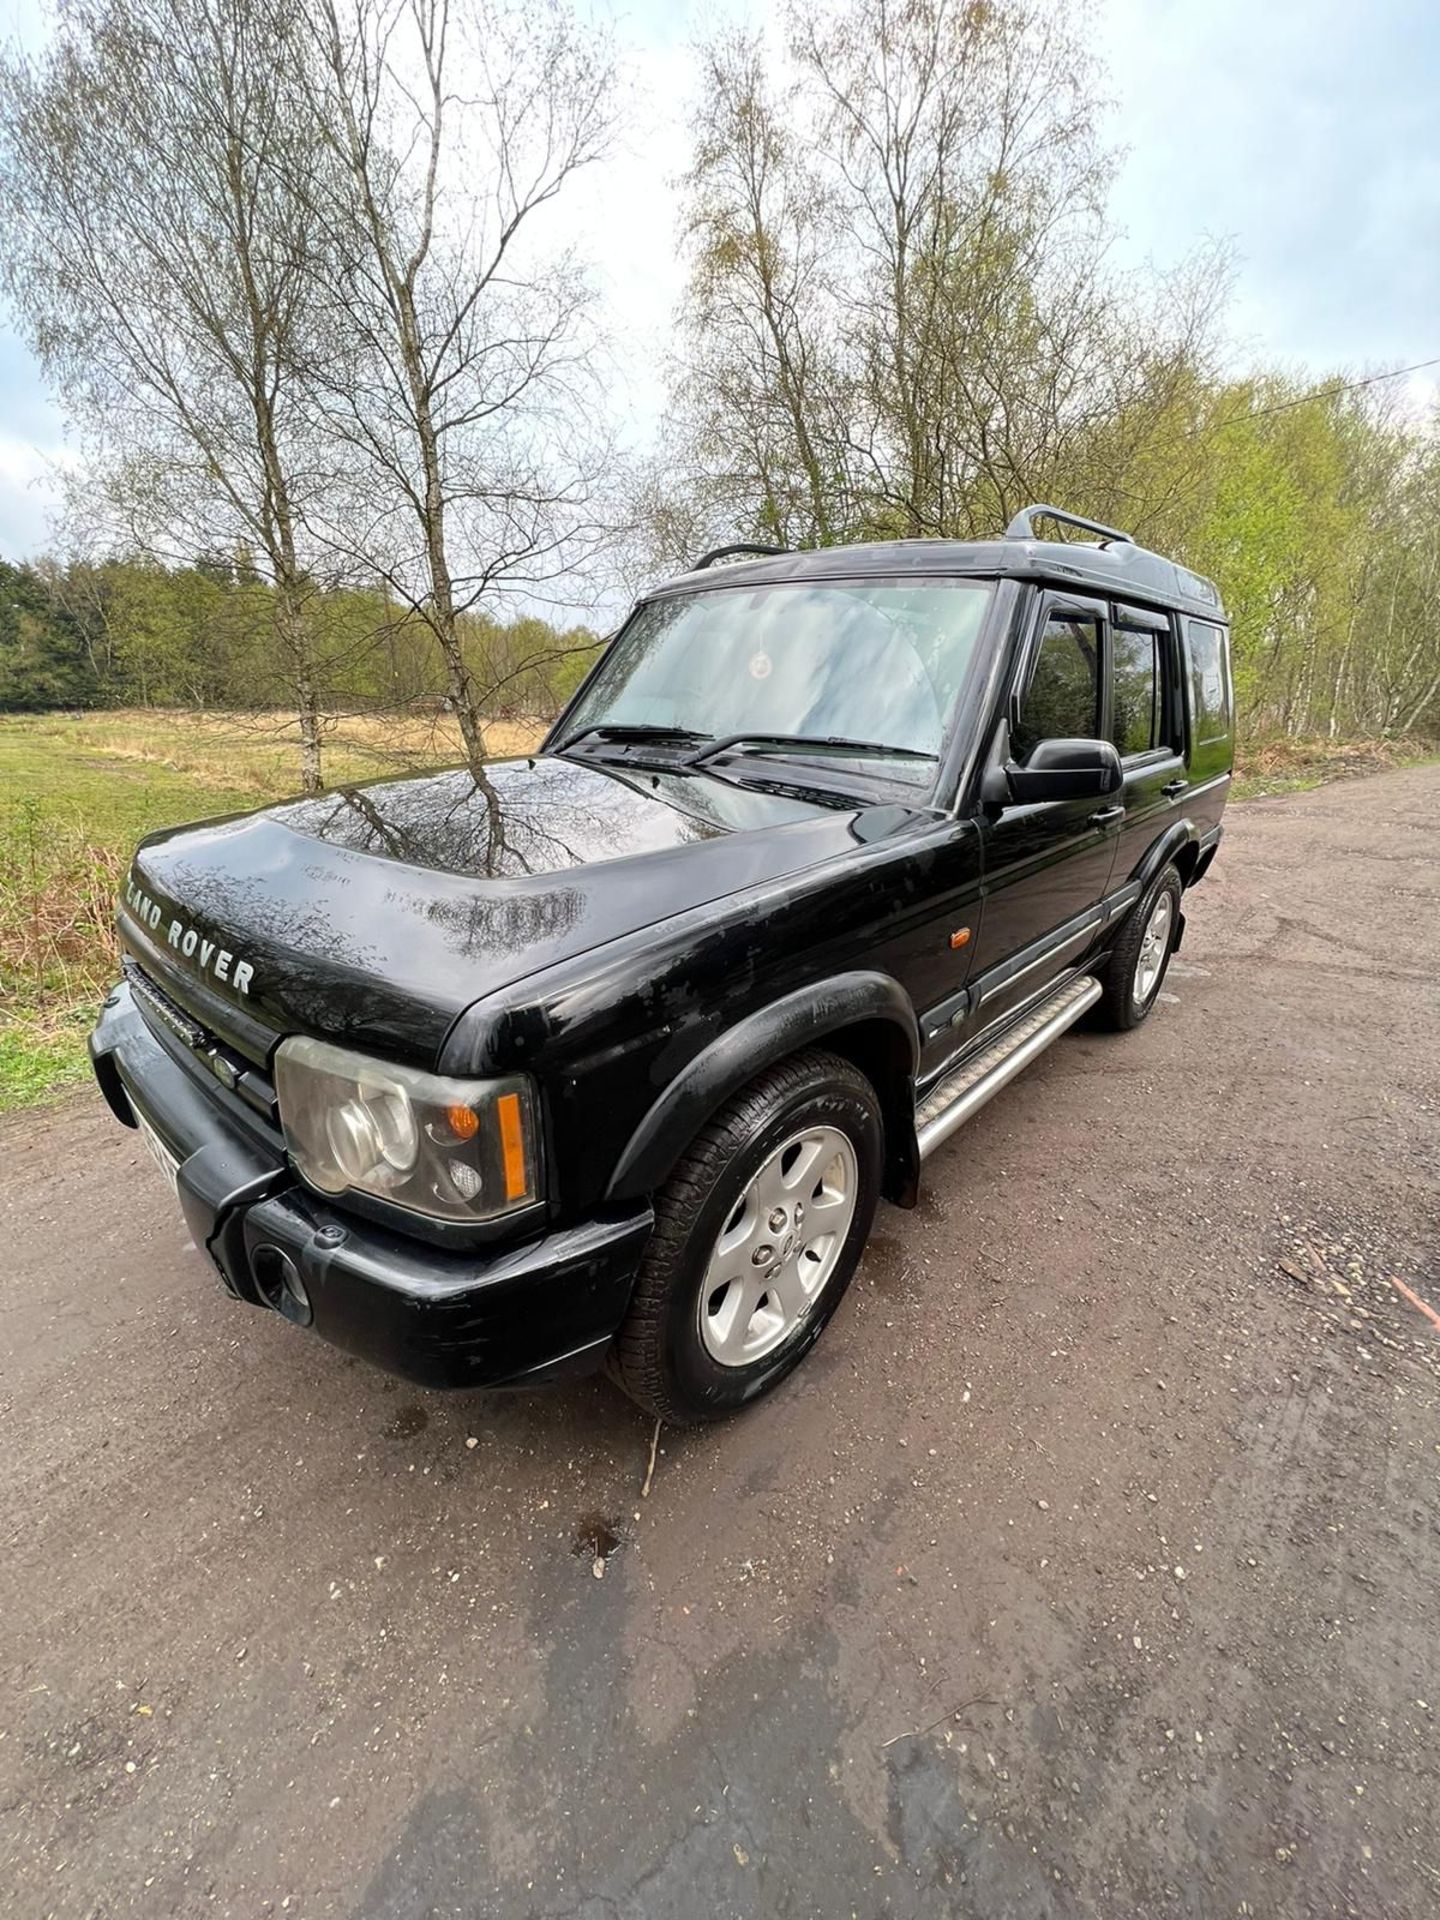 2002 52 PLATE LAND ROVER DISCOVERY 2 SUV ESTATE - TD5 - TOP OF THE RANGE - HALF LEATHER SEATS - Image 3 of 15